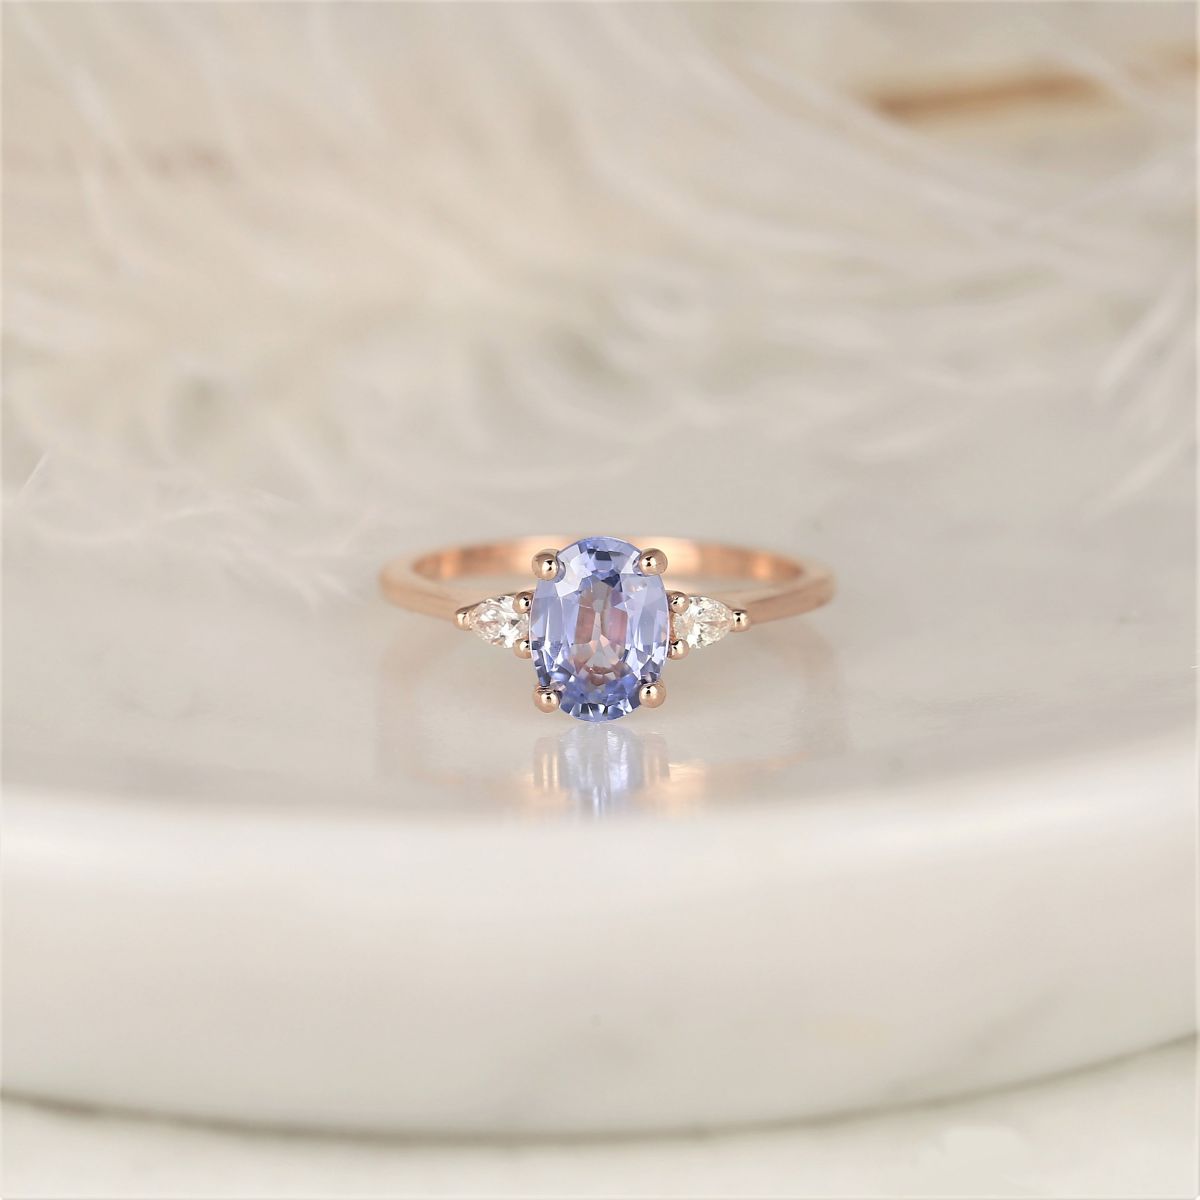 1.43cts Ready to Ship Petite Emery 14kt Rose Gold Cornflower Lavender Sapphire Diamond Pear 3 Stone Oval Engagement Ring,Rosados Box